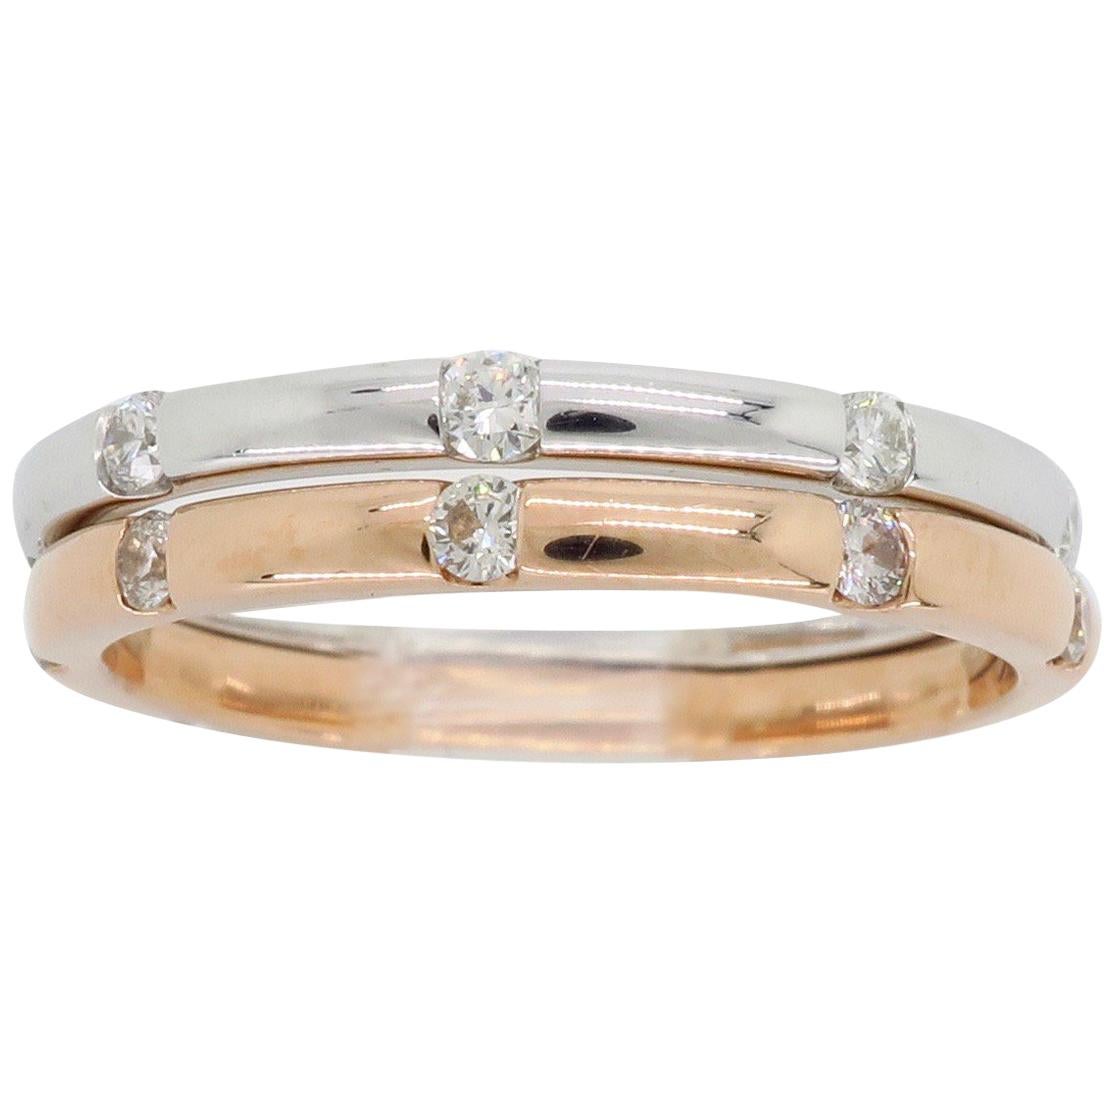 14 Karat Rose and White Gold Diamond Stackable Bands